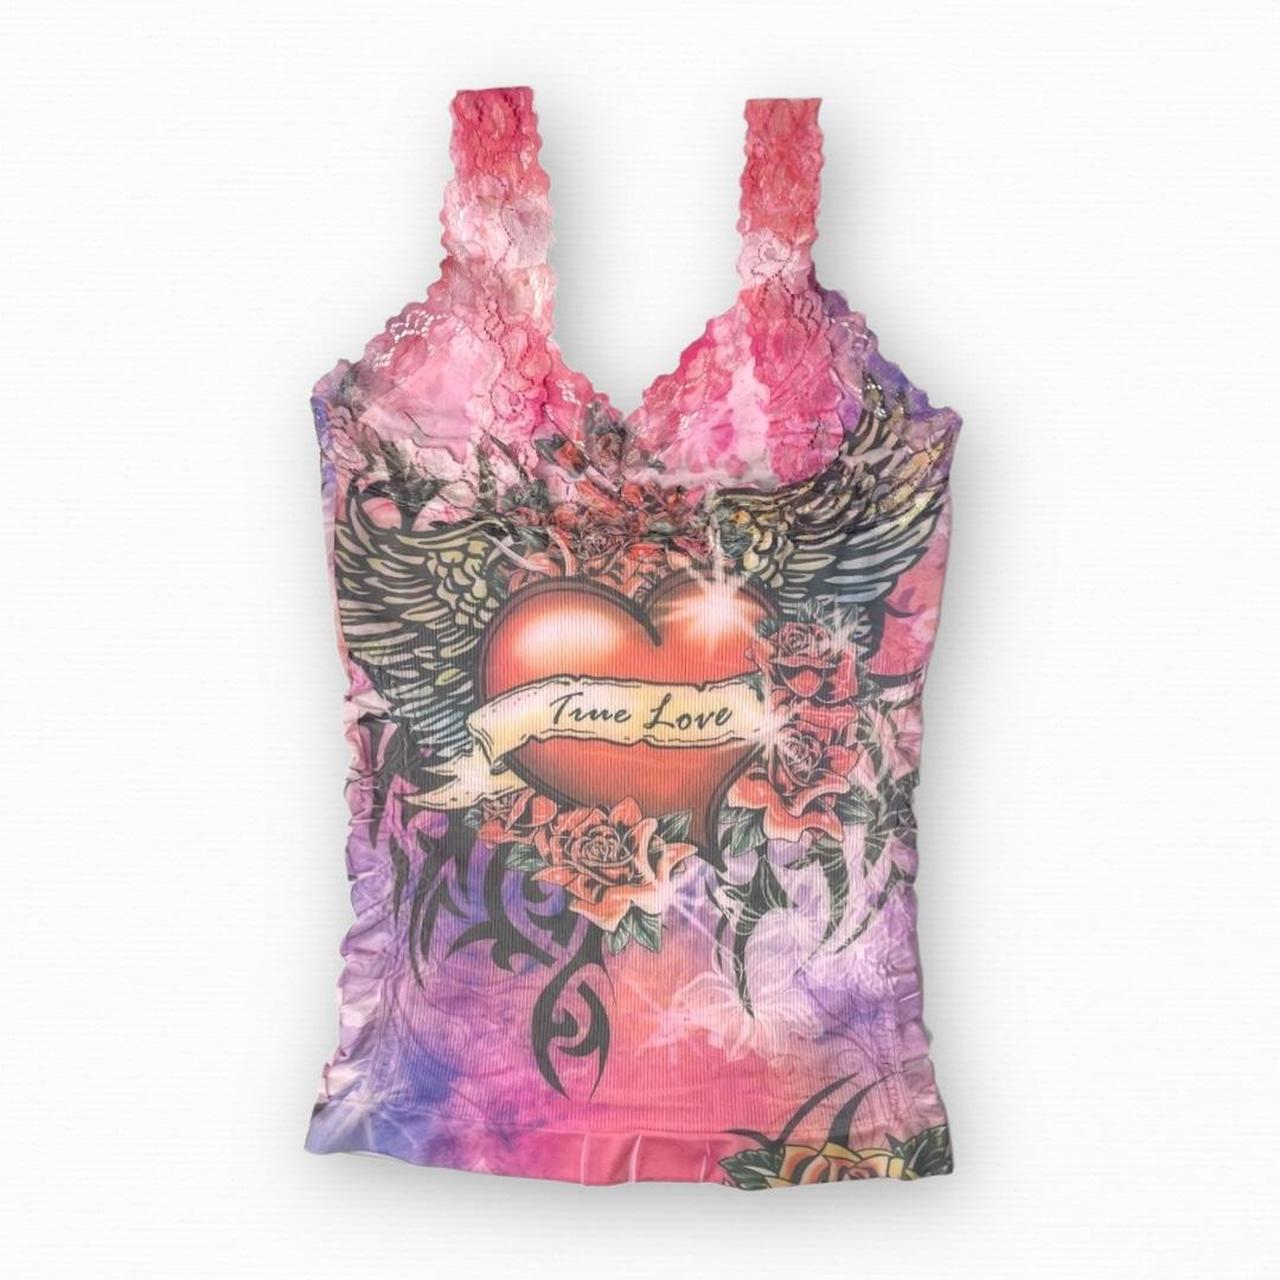 Product Image 2 - Vintage Tank

Cutest little pink and